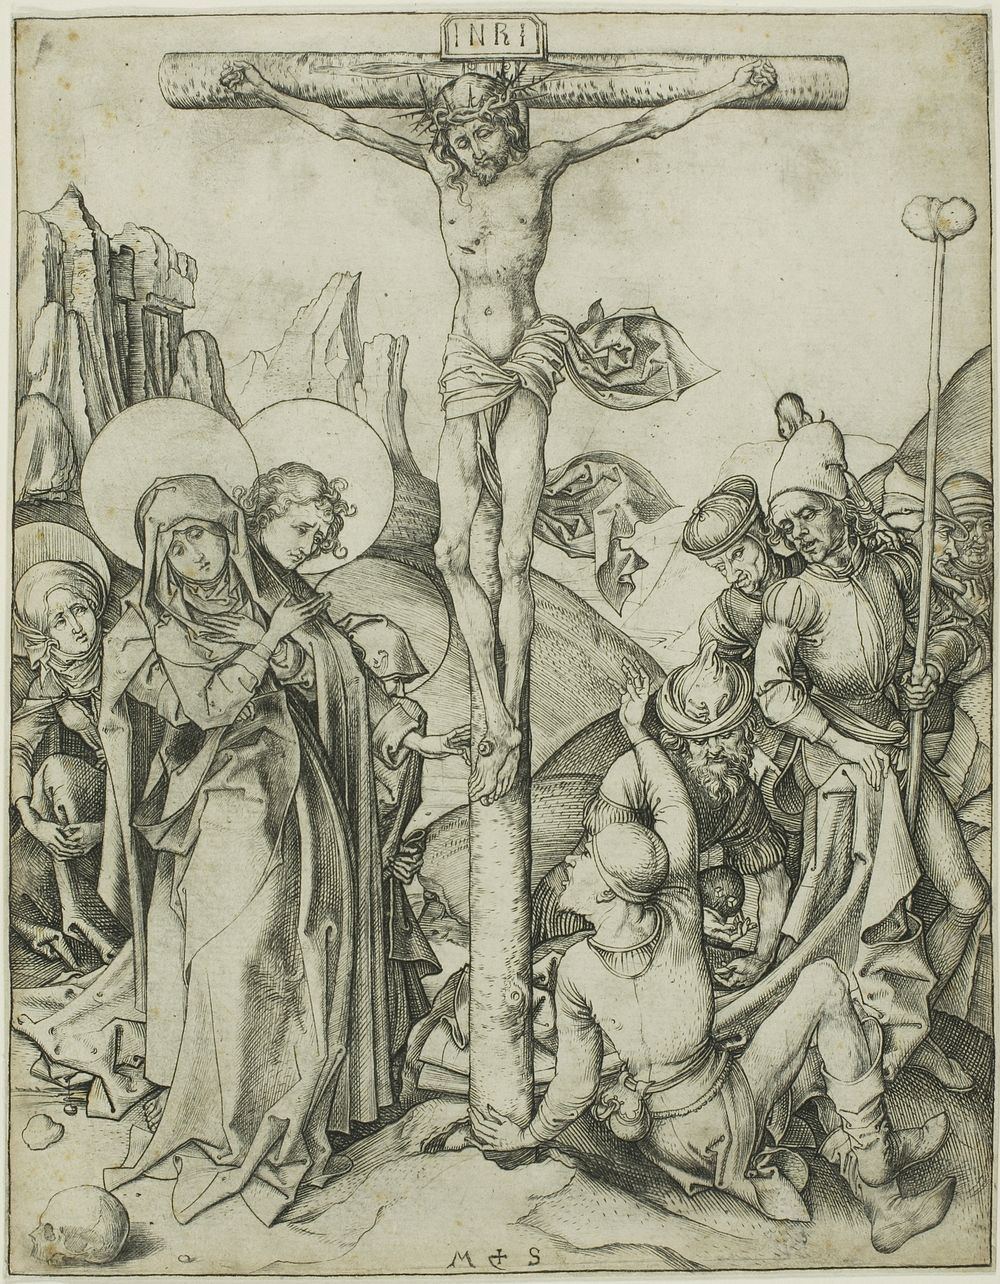 The Crucifixion with the Holy Women, St. John and Roman Soldiers by Martin Schongauer